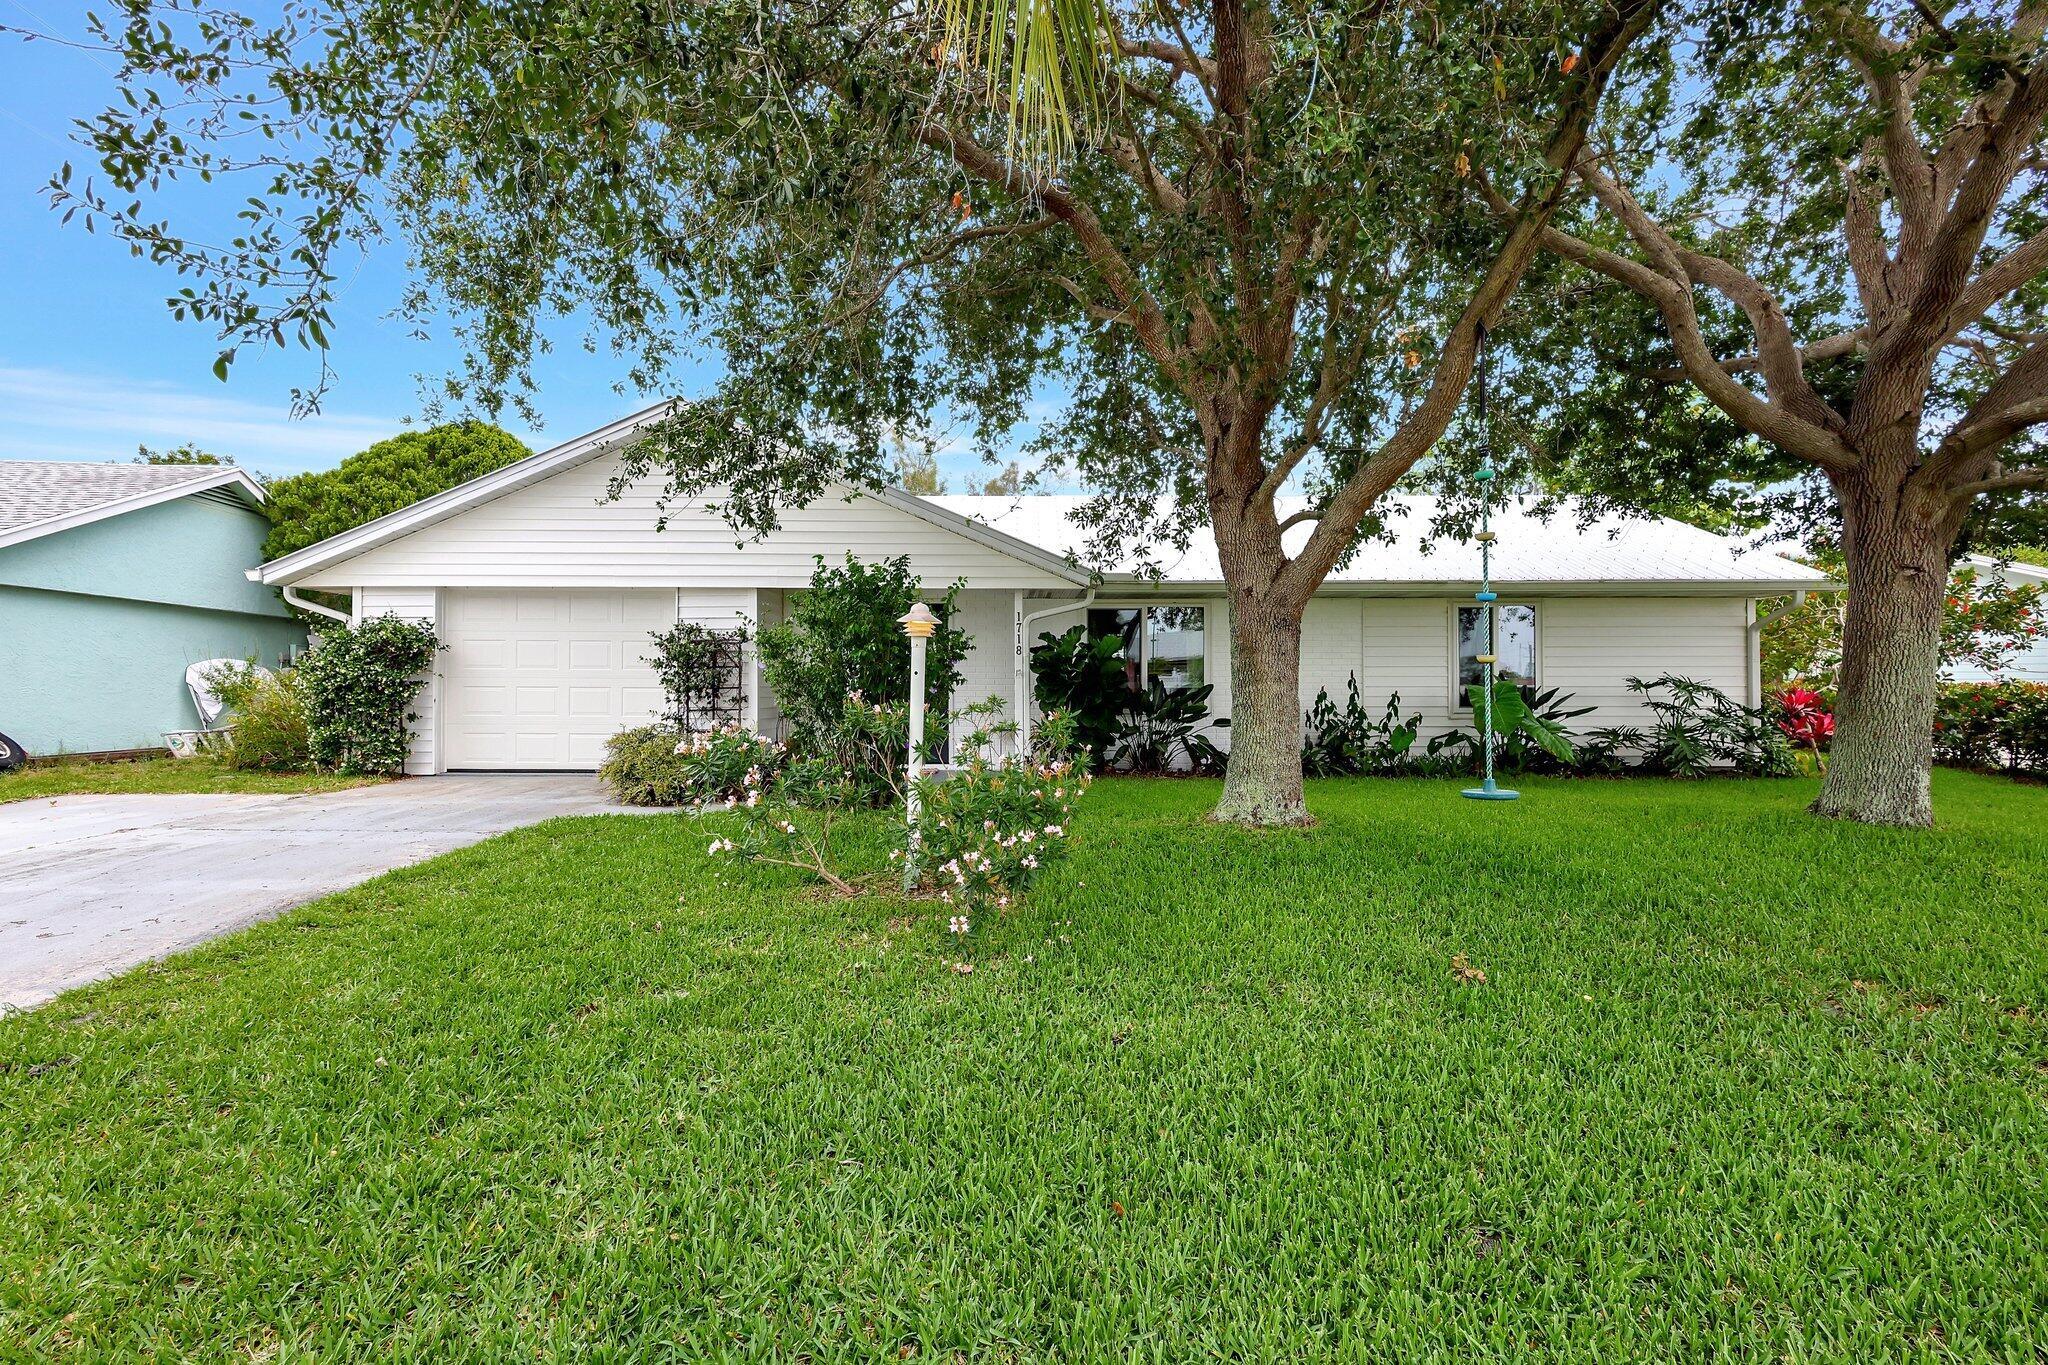 Leilani Heights Charmer in the heart of Jensen Beach. 3/2 single family home with 1 car garage. Complete IMPACT glass and impact doors (2023) plus garage door (2017) for hurricane mitigation credit. Metal roof 2018. A/C 2017.  Great kitchen & bonus family room. Nice sized lot, well landscaped & backs to HOA owned green space. Mostly fenced backyard w/paver patio, kid's fort & shed. Many updates in kitchen, baths, flooring & throughout home. Very nicely maintained.  Home has a split BR plan & all BR's have walk-in closets. Public water & sewer. Sprinklers on well. Full size washer & dryer in garage. Low HOA dues of $150 per year. Community playground area close by. In walking distance to Jensen Beach Elementary. Close to the Beaches, downtown Jensen, mall, dining & more